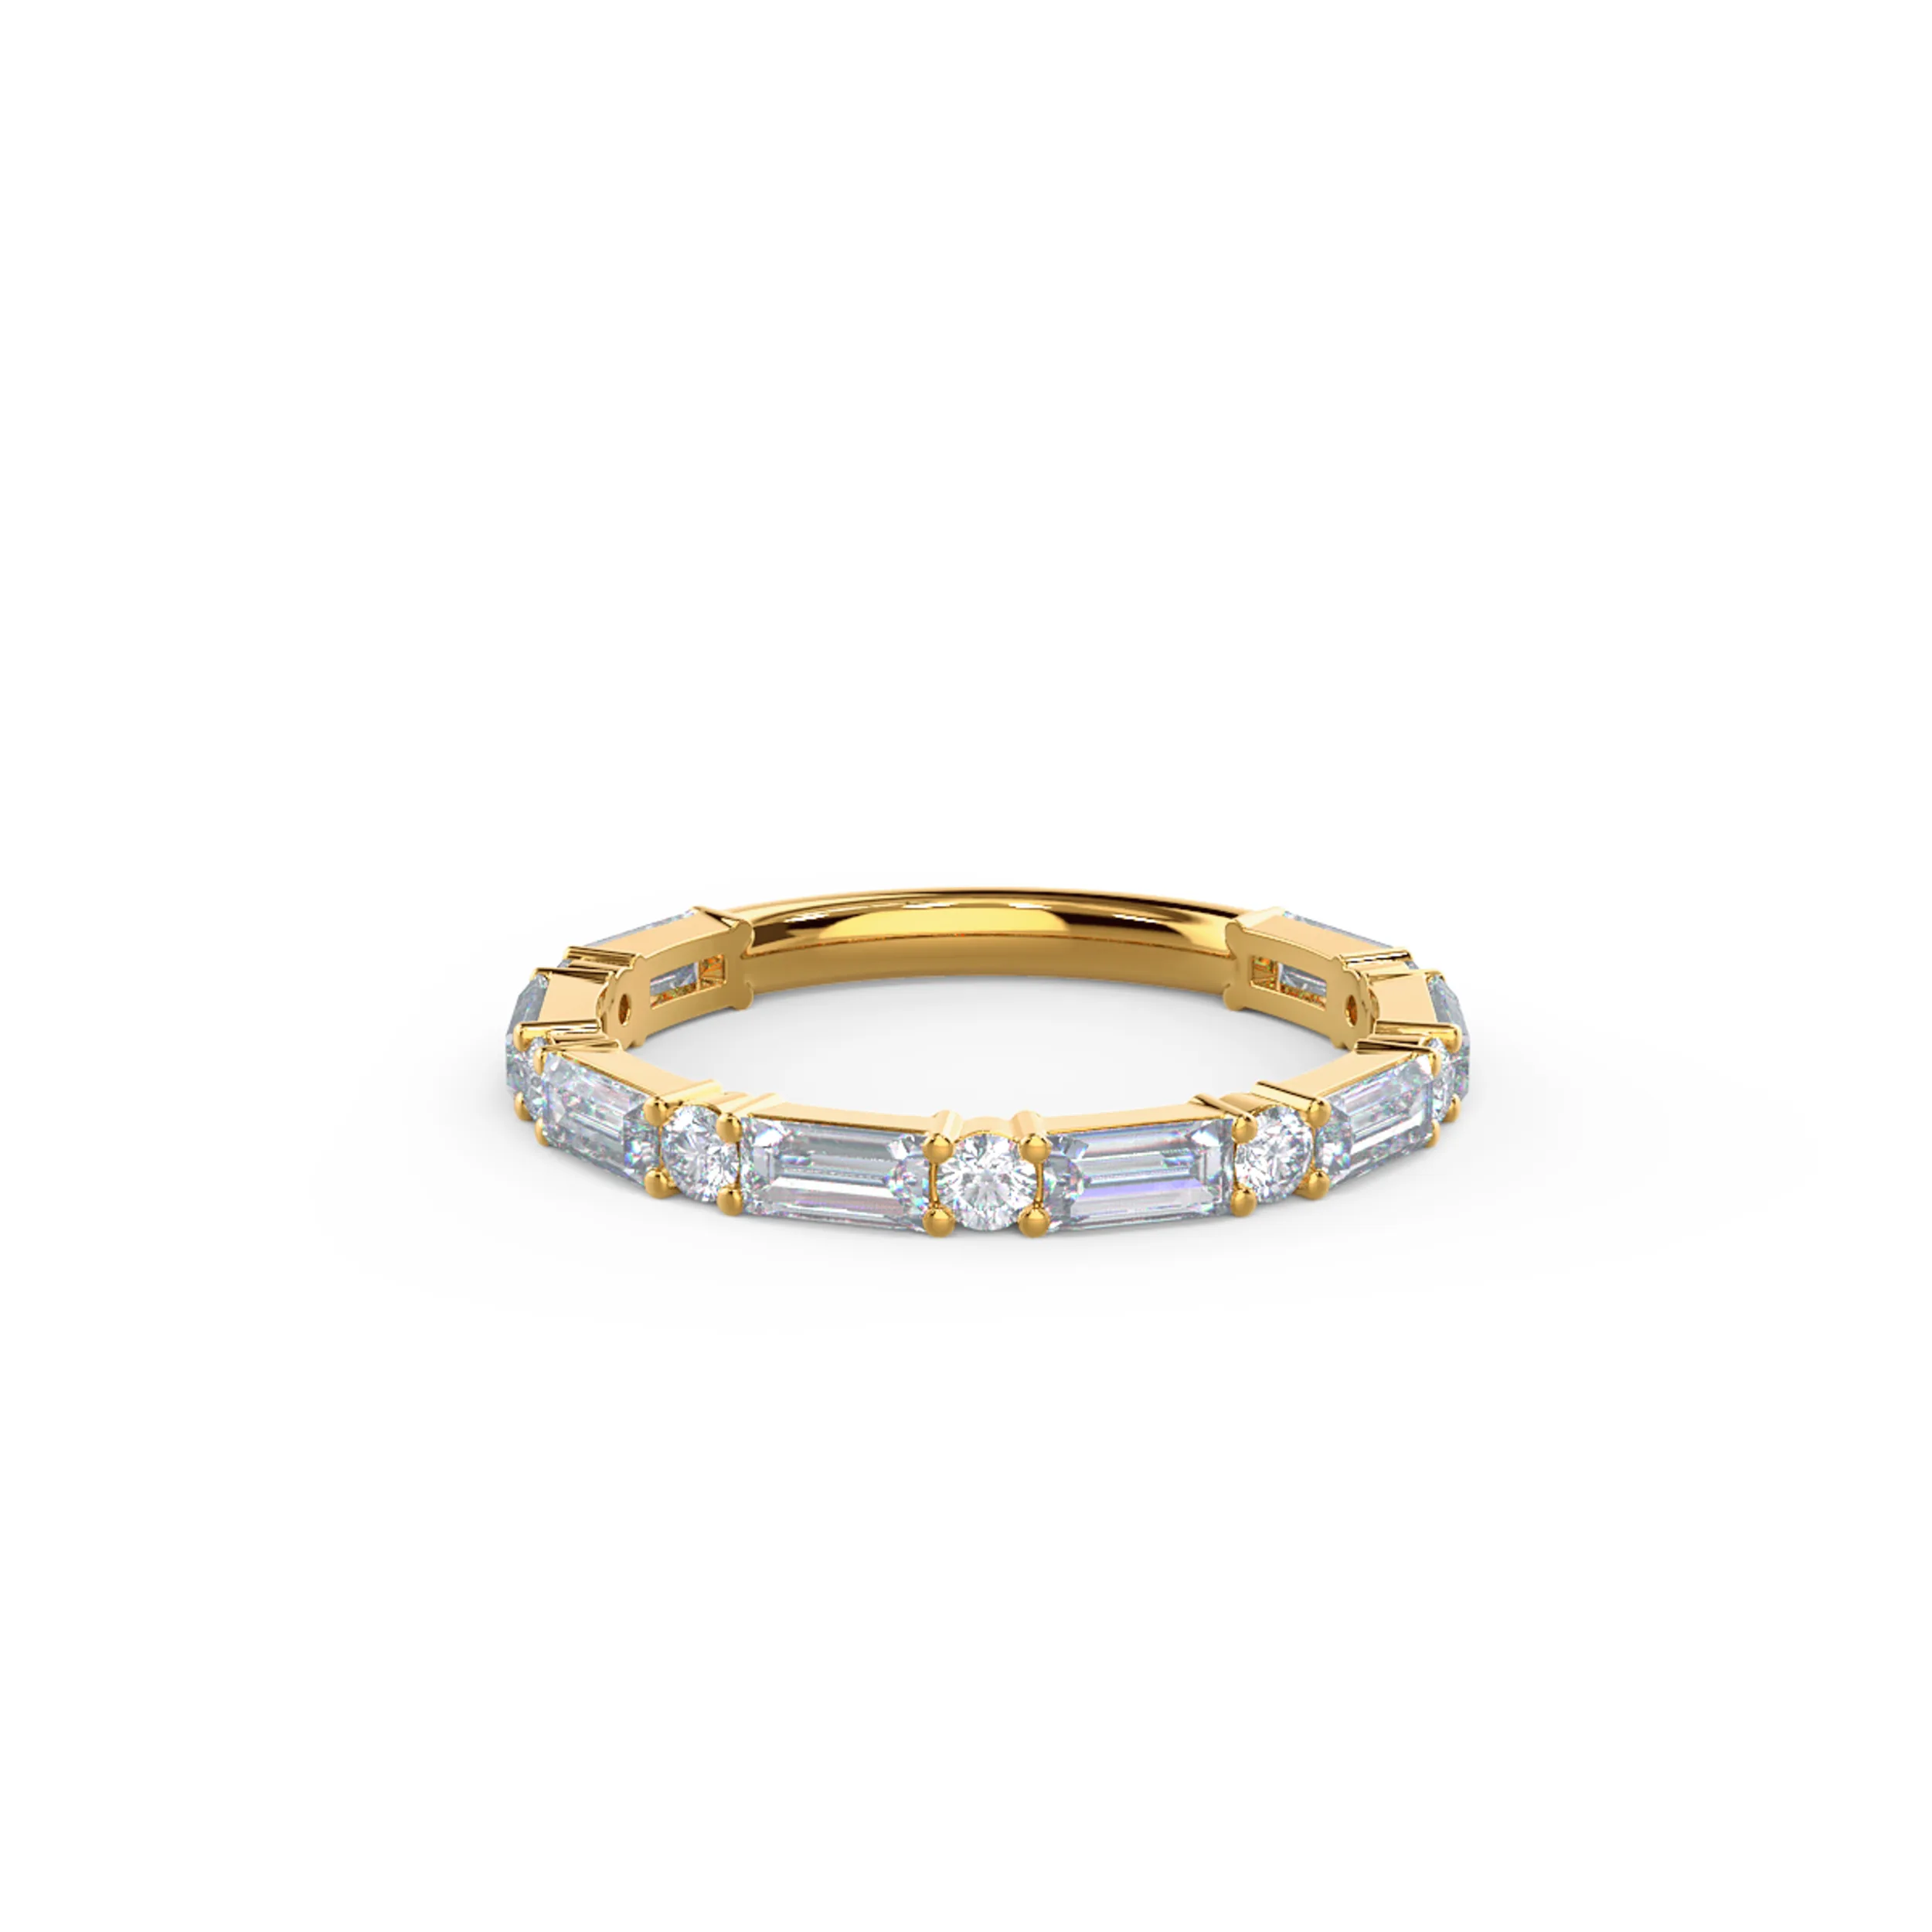 1.0 ct Lab Diamonds set in 18k Yellow Gold Baguette and Round Three Quarter Band (Main View)